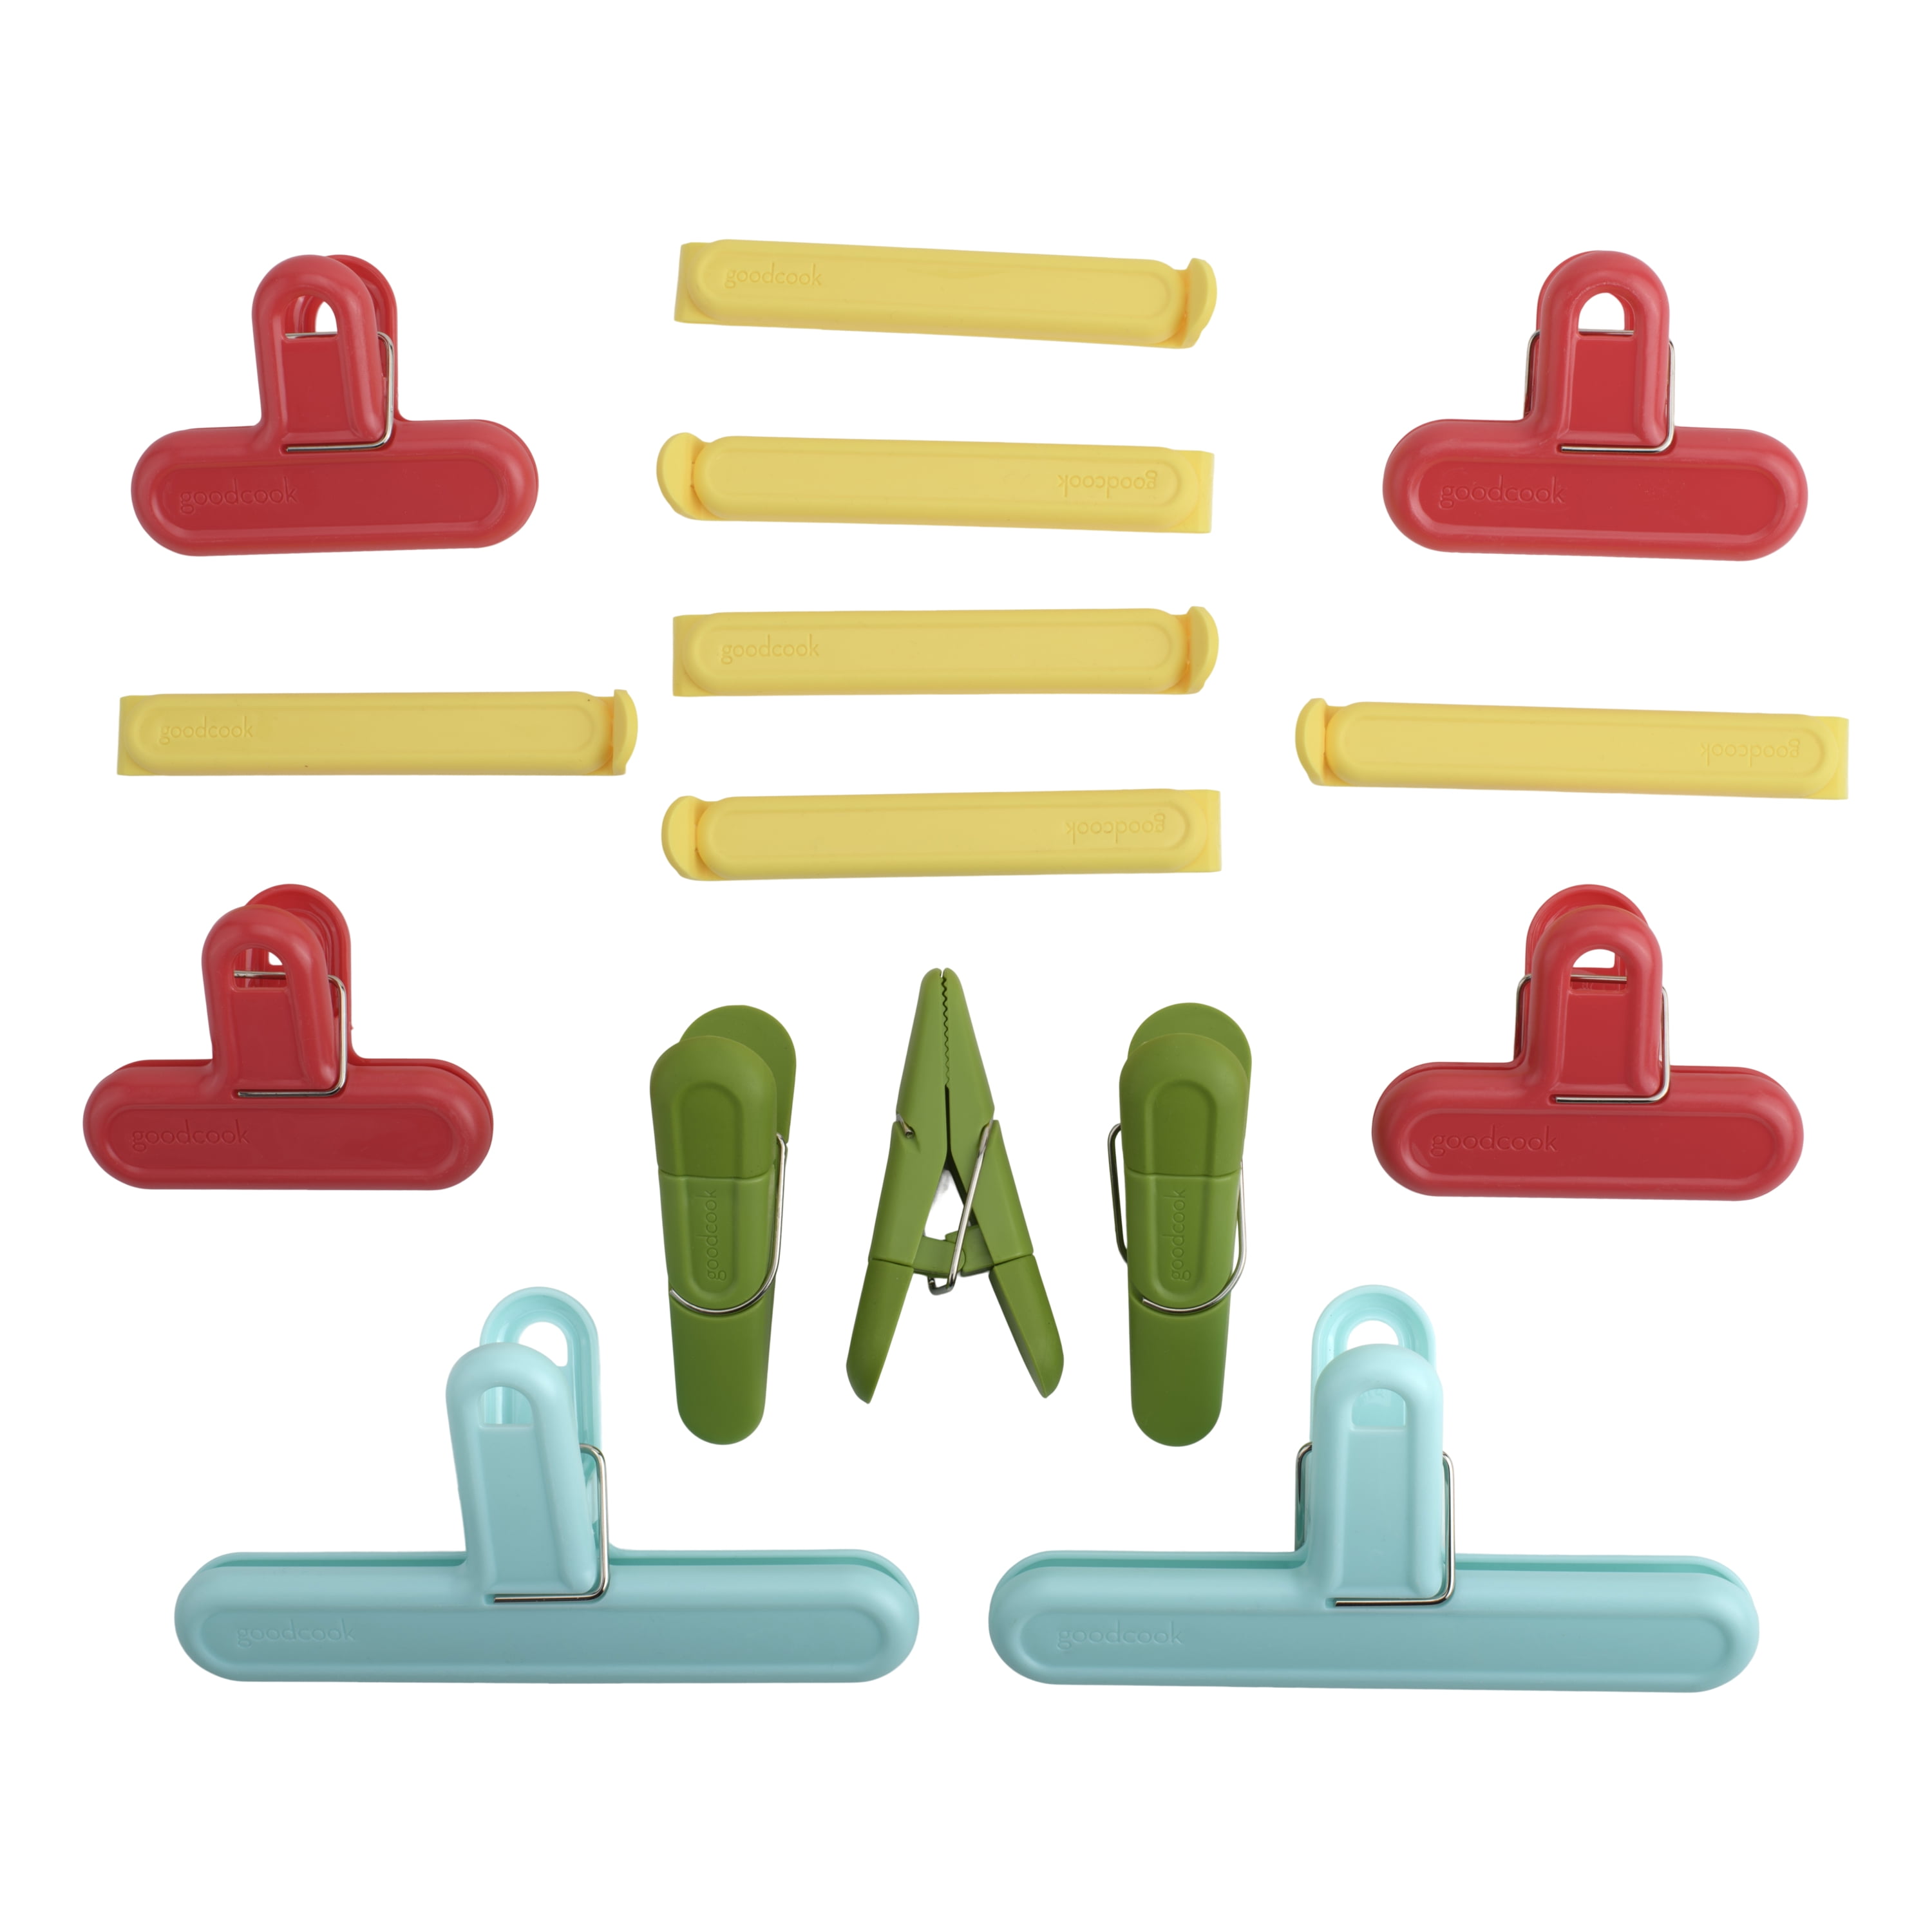 Good Cook Assorted Touch Bag Clips - Shop Utensils & Gadgets at H-E-B